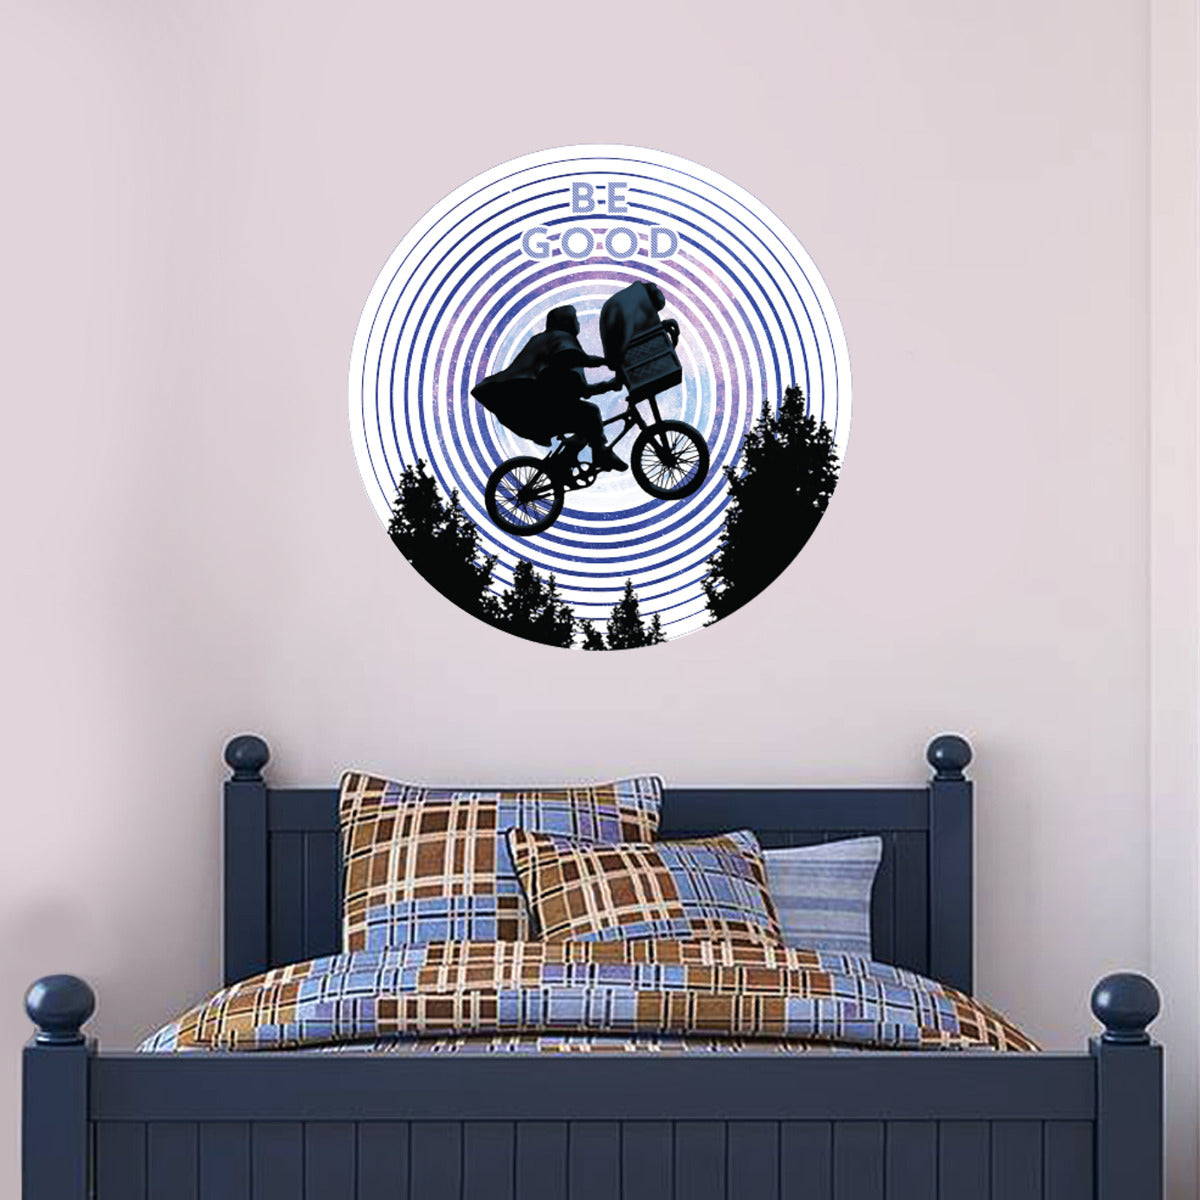 ET the Extra-Terrestrial Wall Sticker Be Good Circle